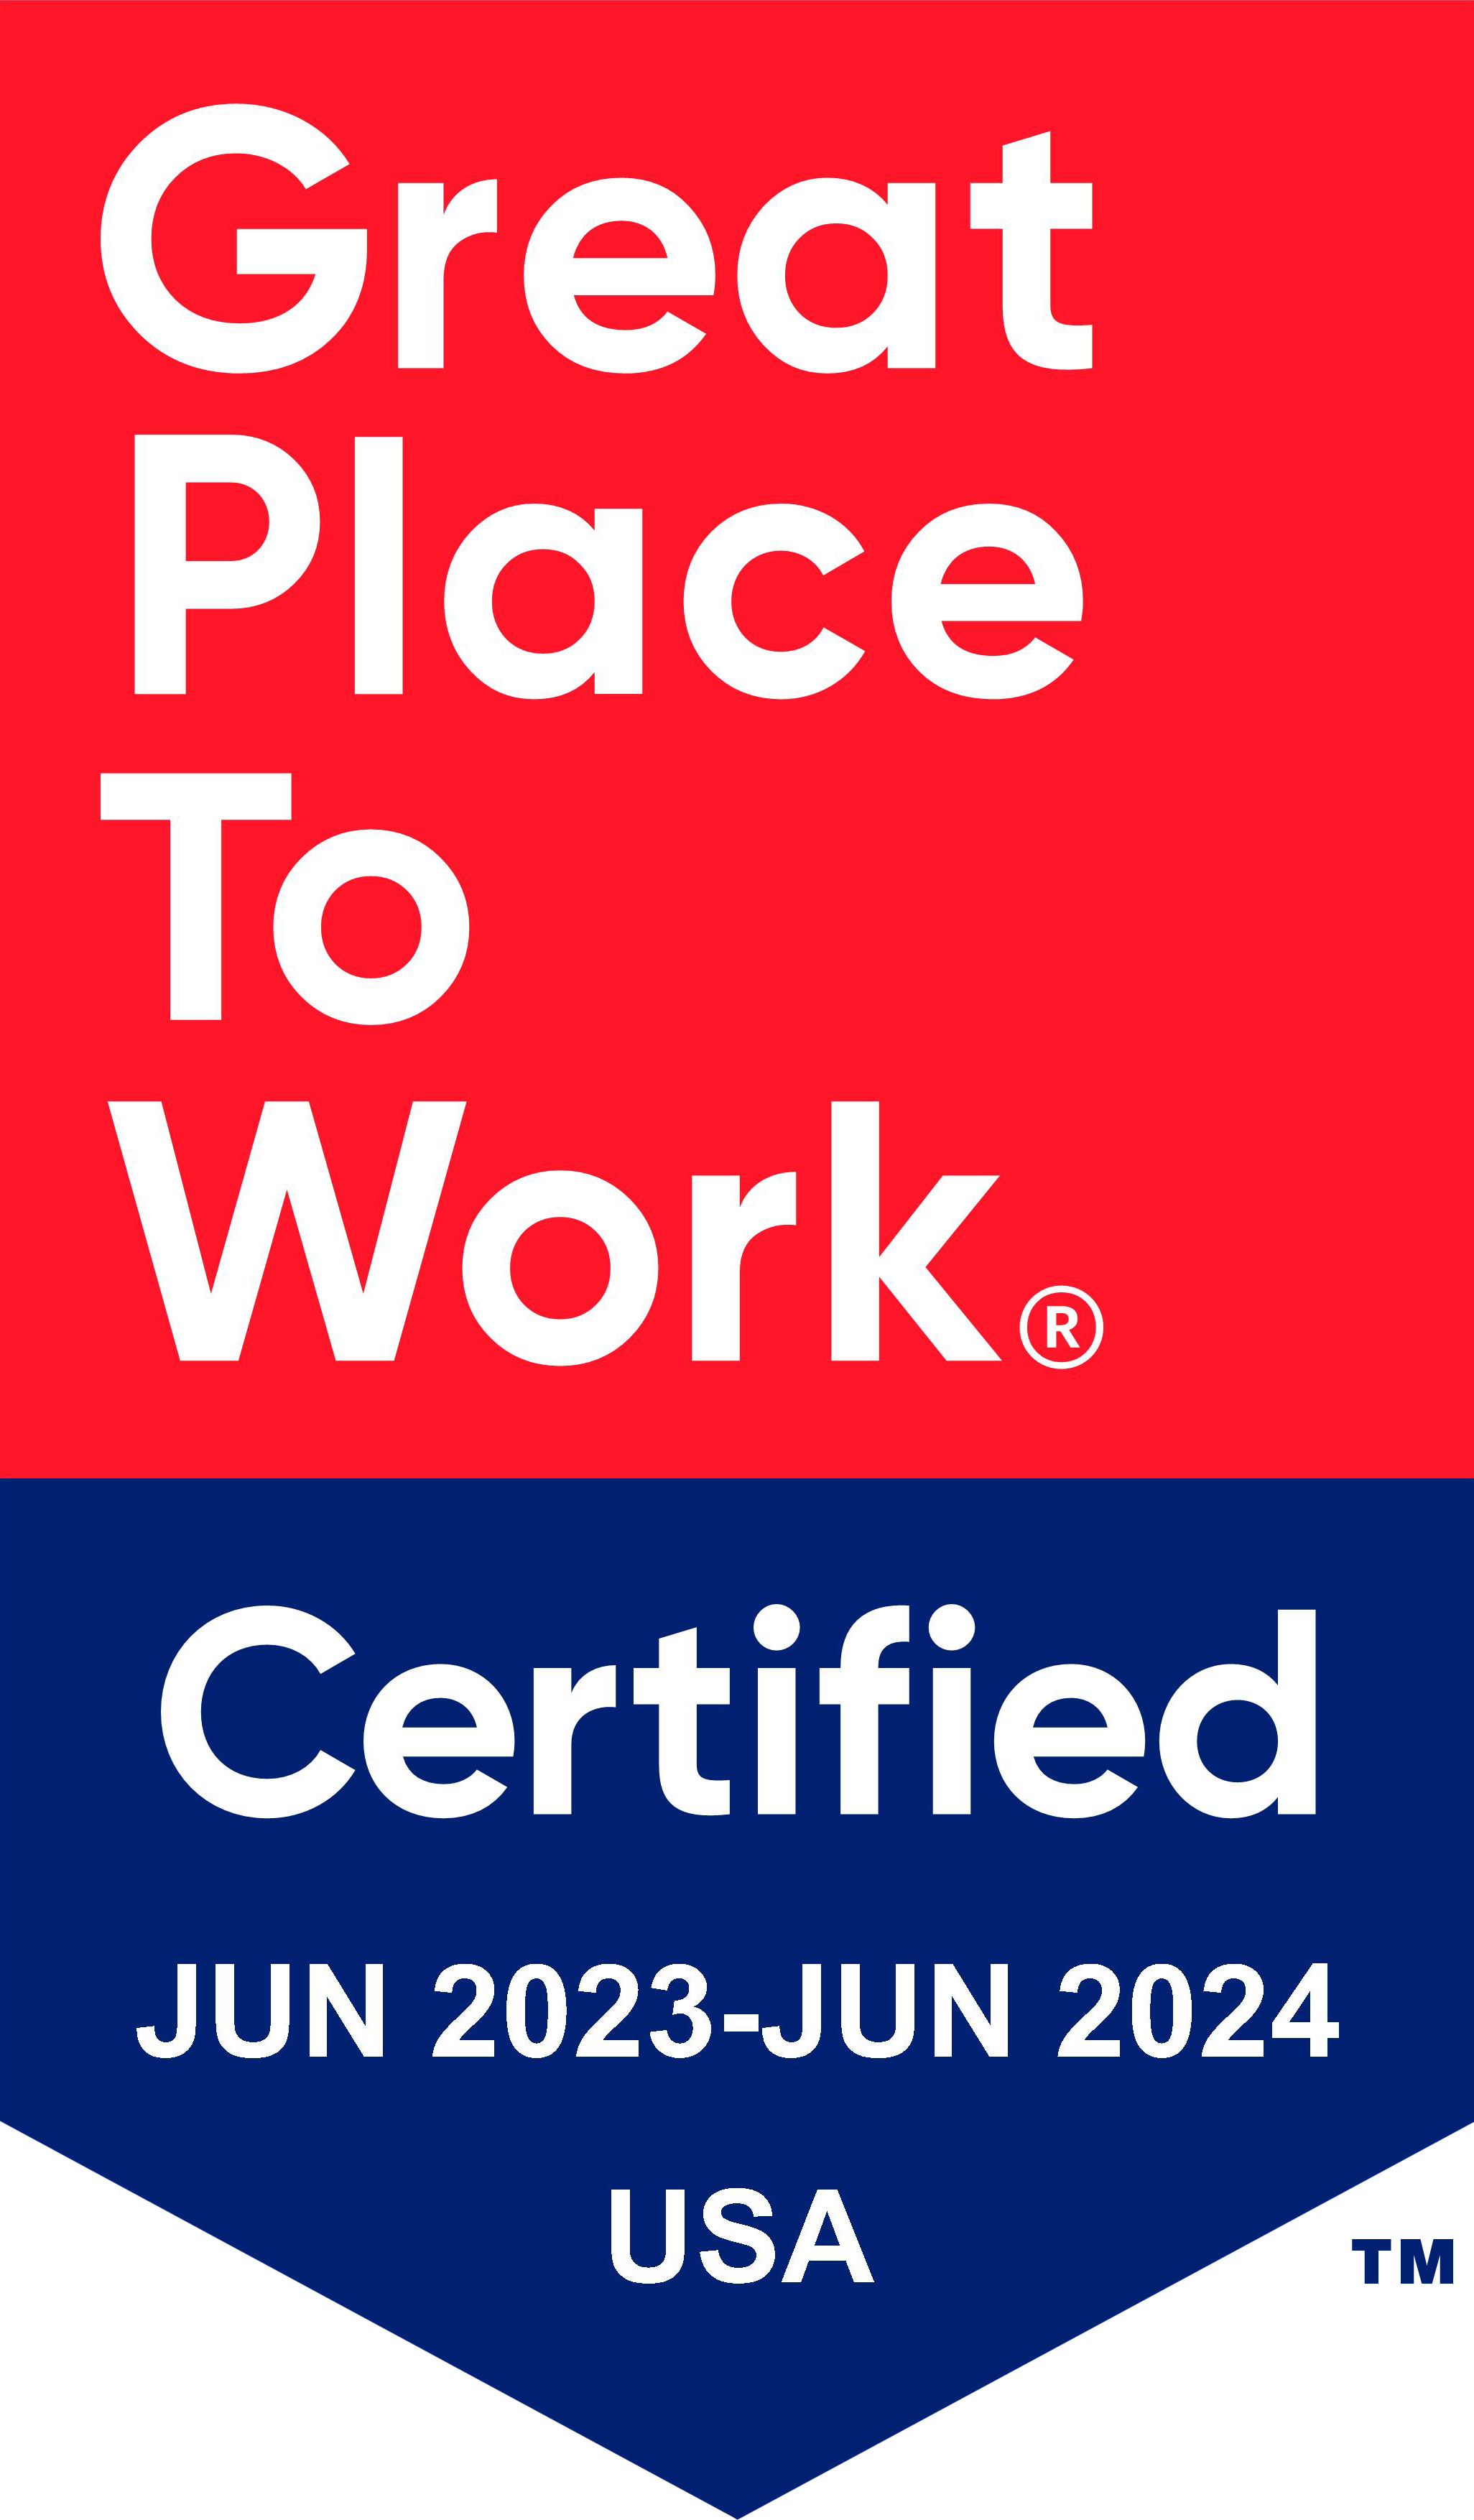 Certified Great Place to Work logo for 2023-2024